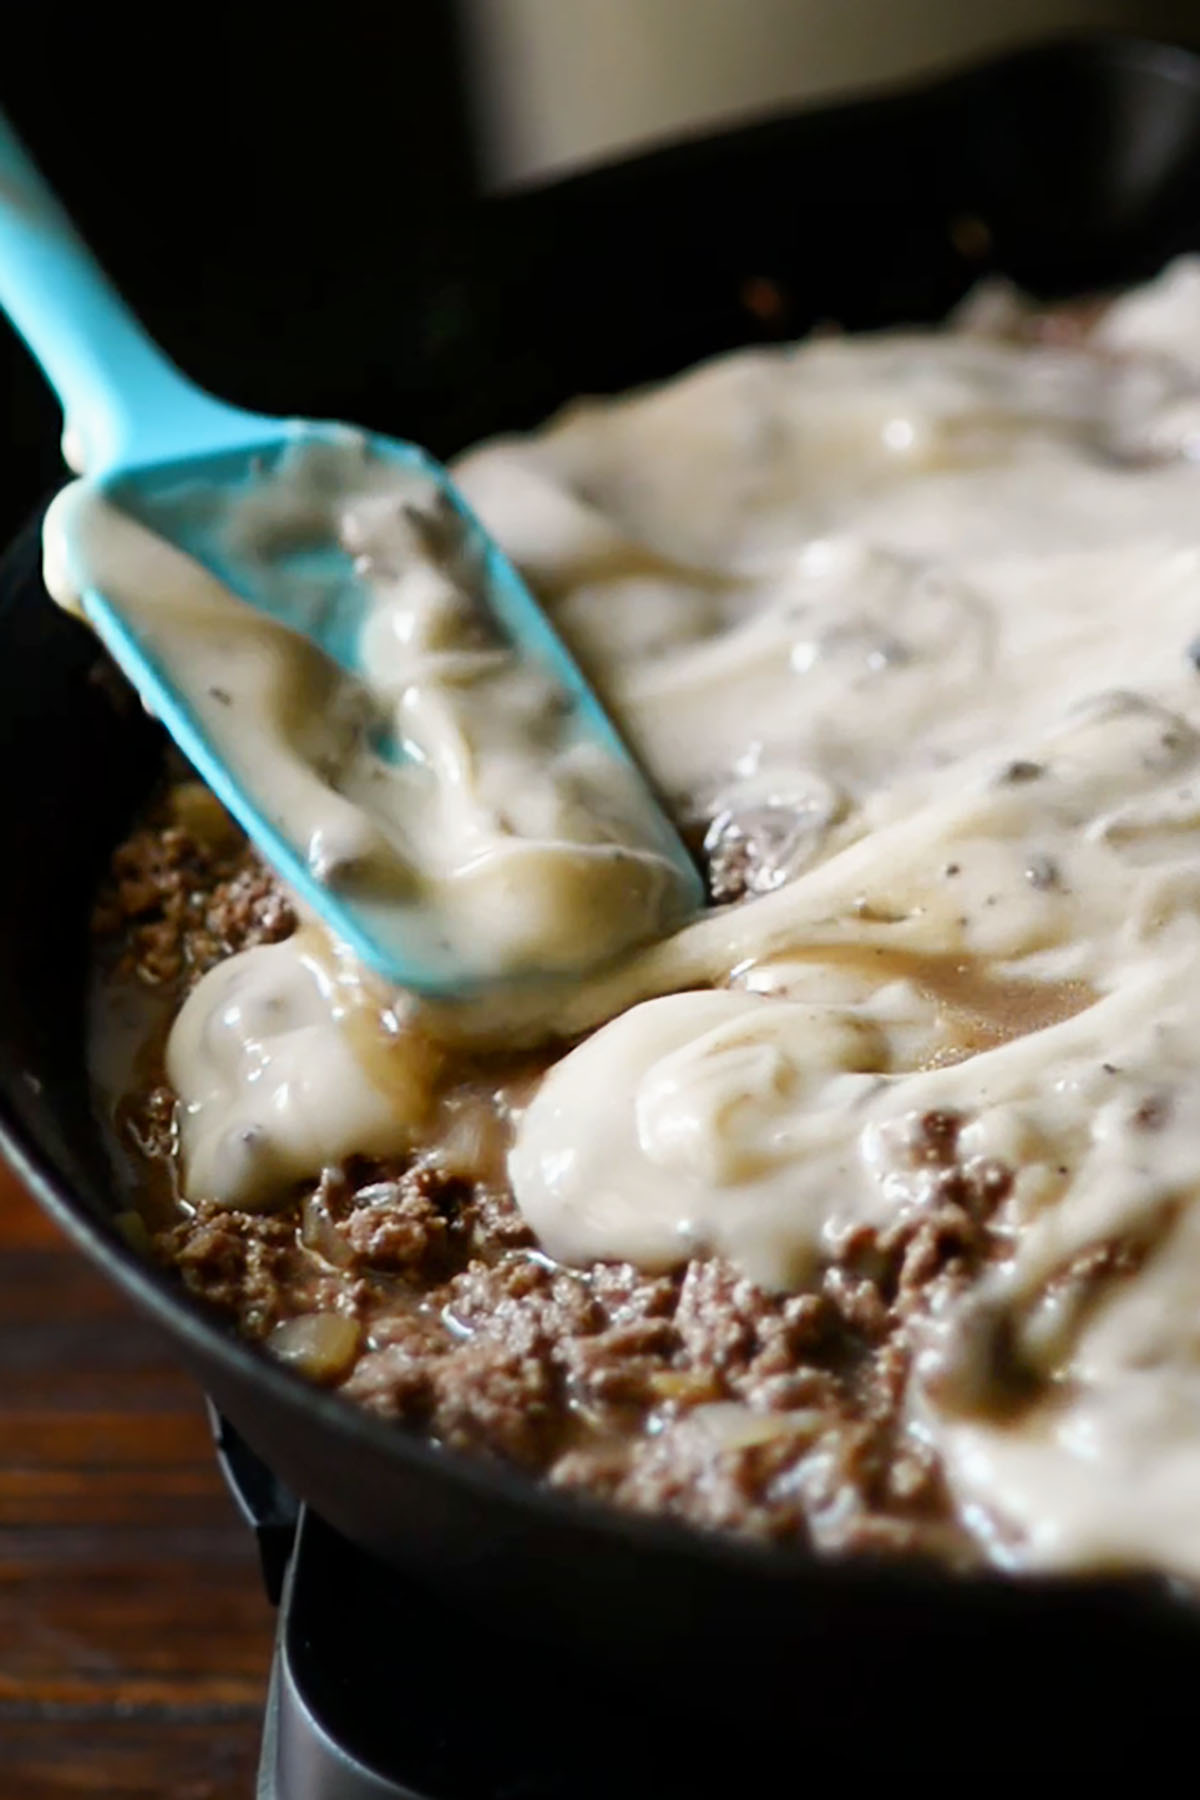 Cream of mushroom soup being poured over ground beef and onions in a cast iron skillet.